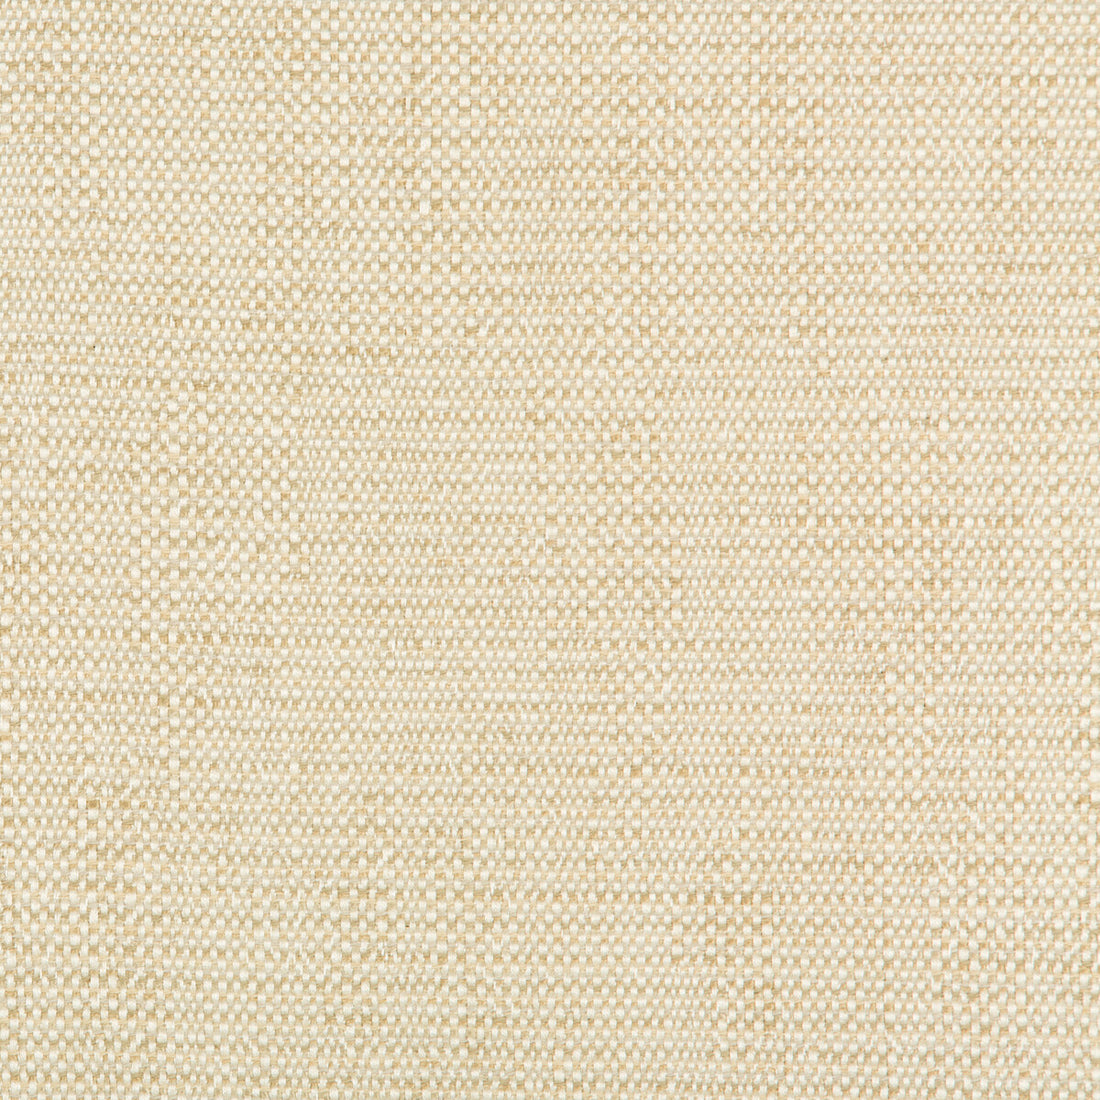 Kravet Design fabric in 35135-116 color - pattern 35135.116.0 - by Kravet Design in the Performance Crypton Home collection